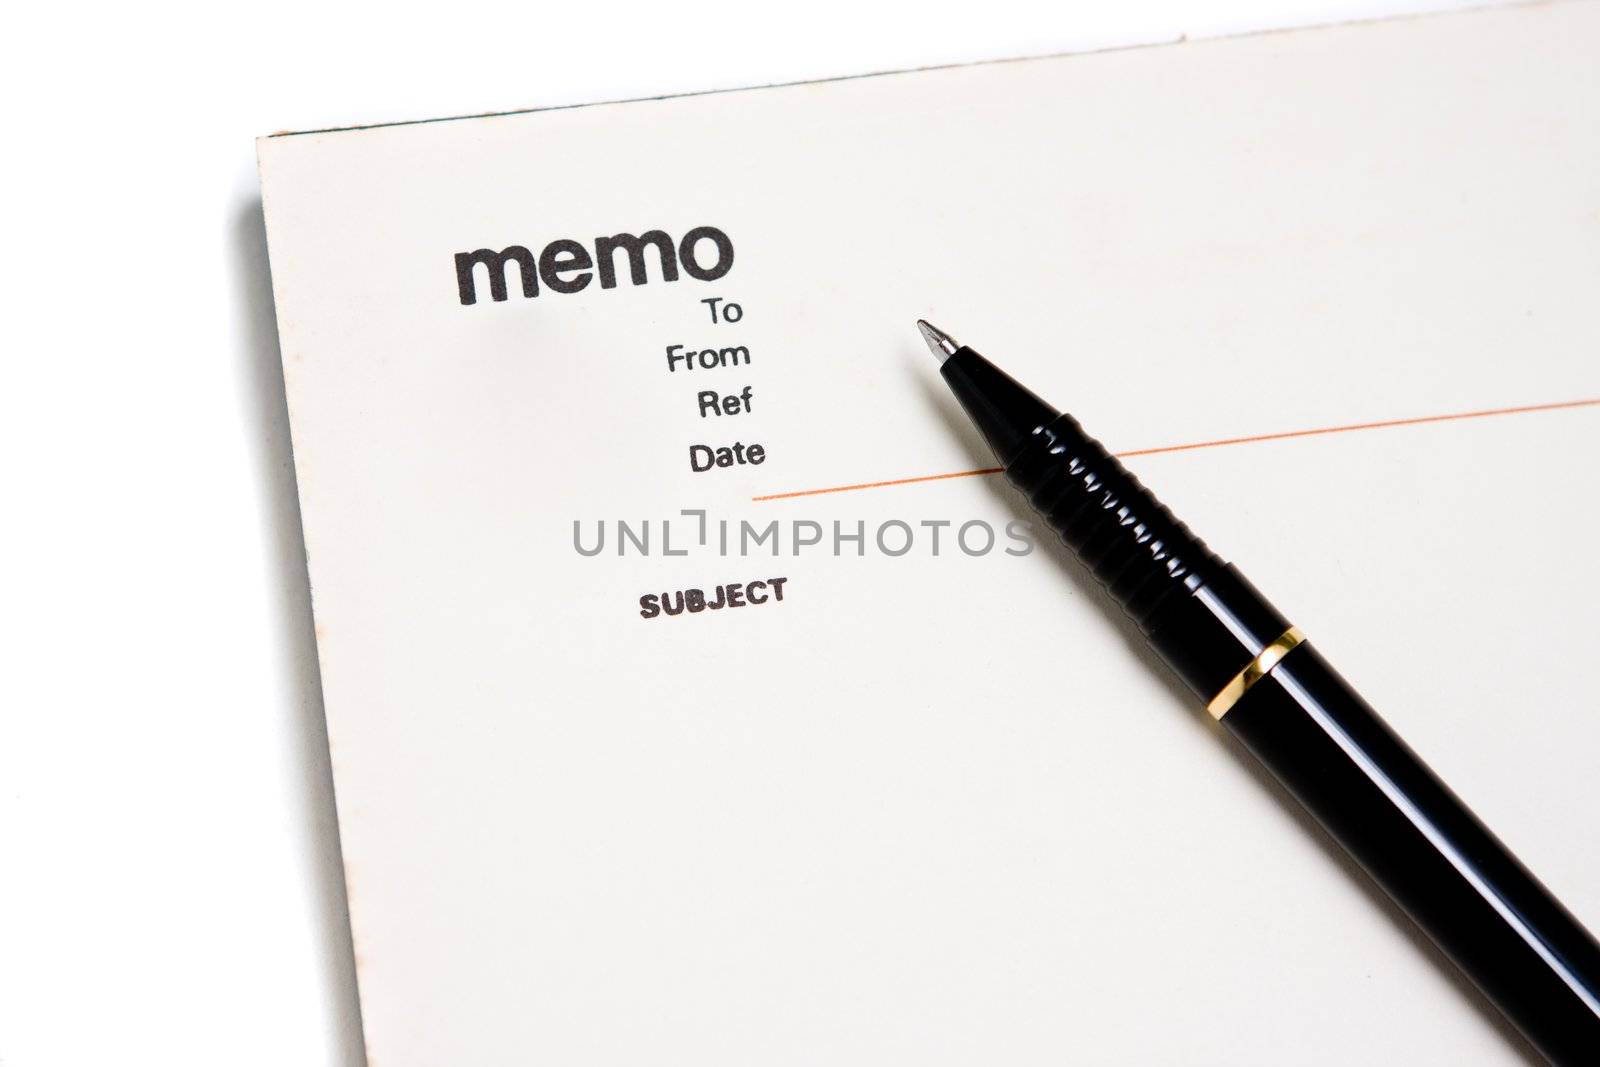 Blank memo pad notebook to insert text, copy space